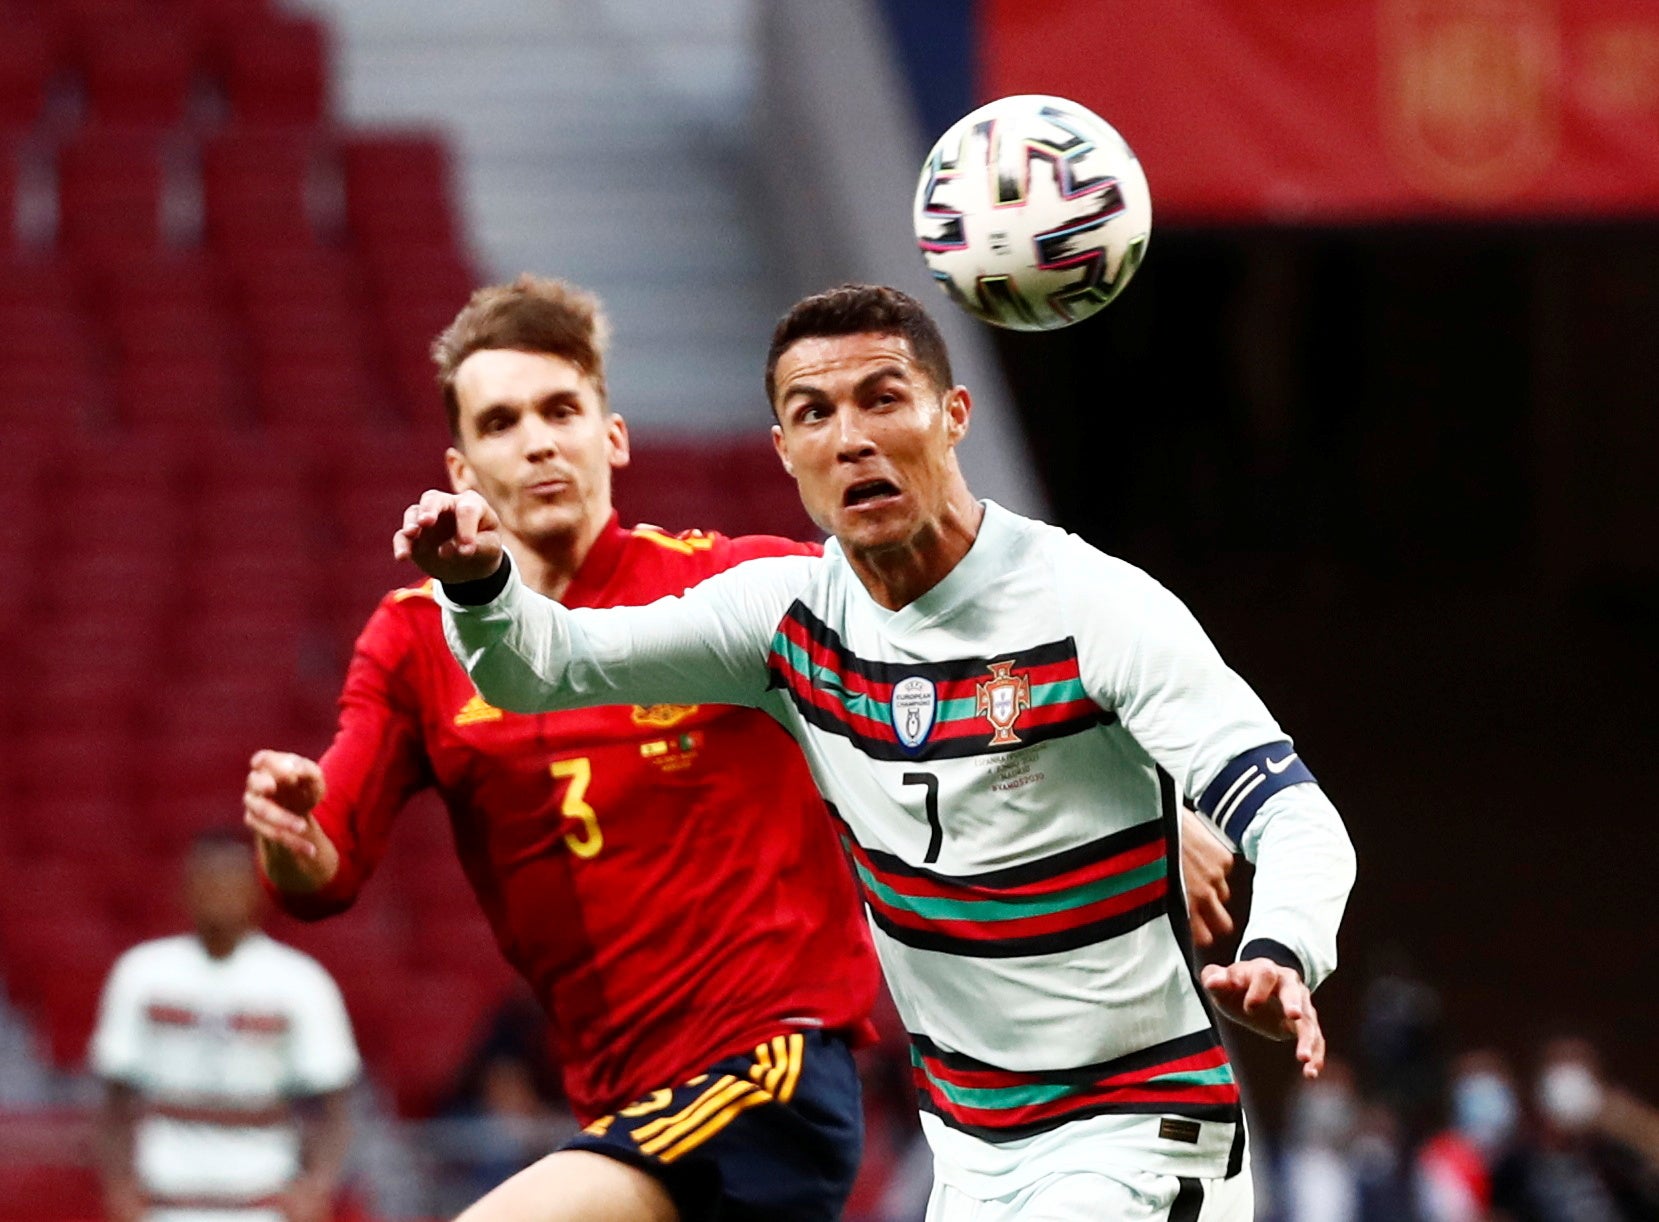 Cristiano Ronaldo couldn’t find a goal for Portugal